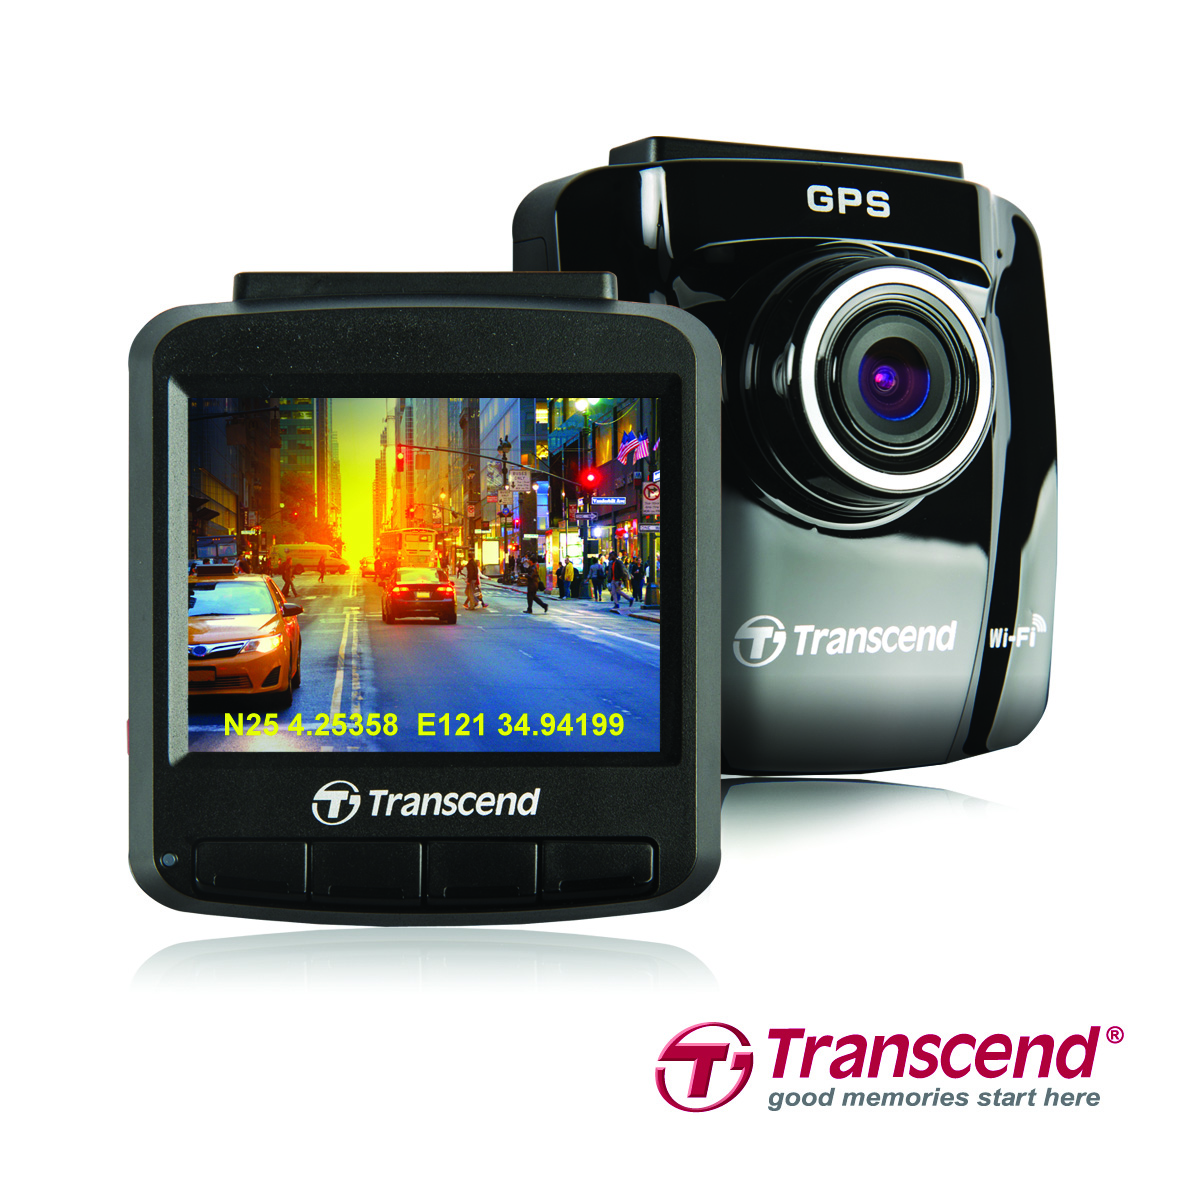 Transcend Releases DrivePro 220 Car Video Recorder with Built-in